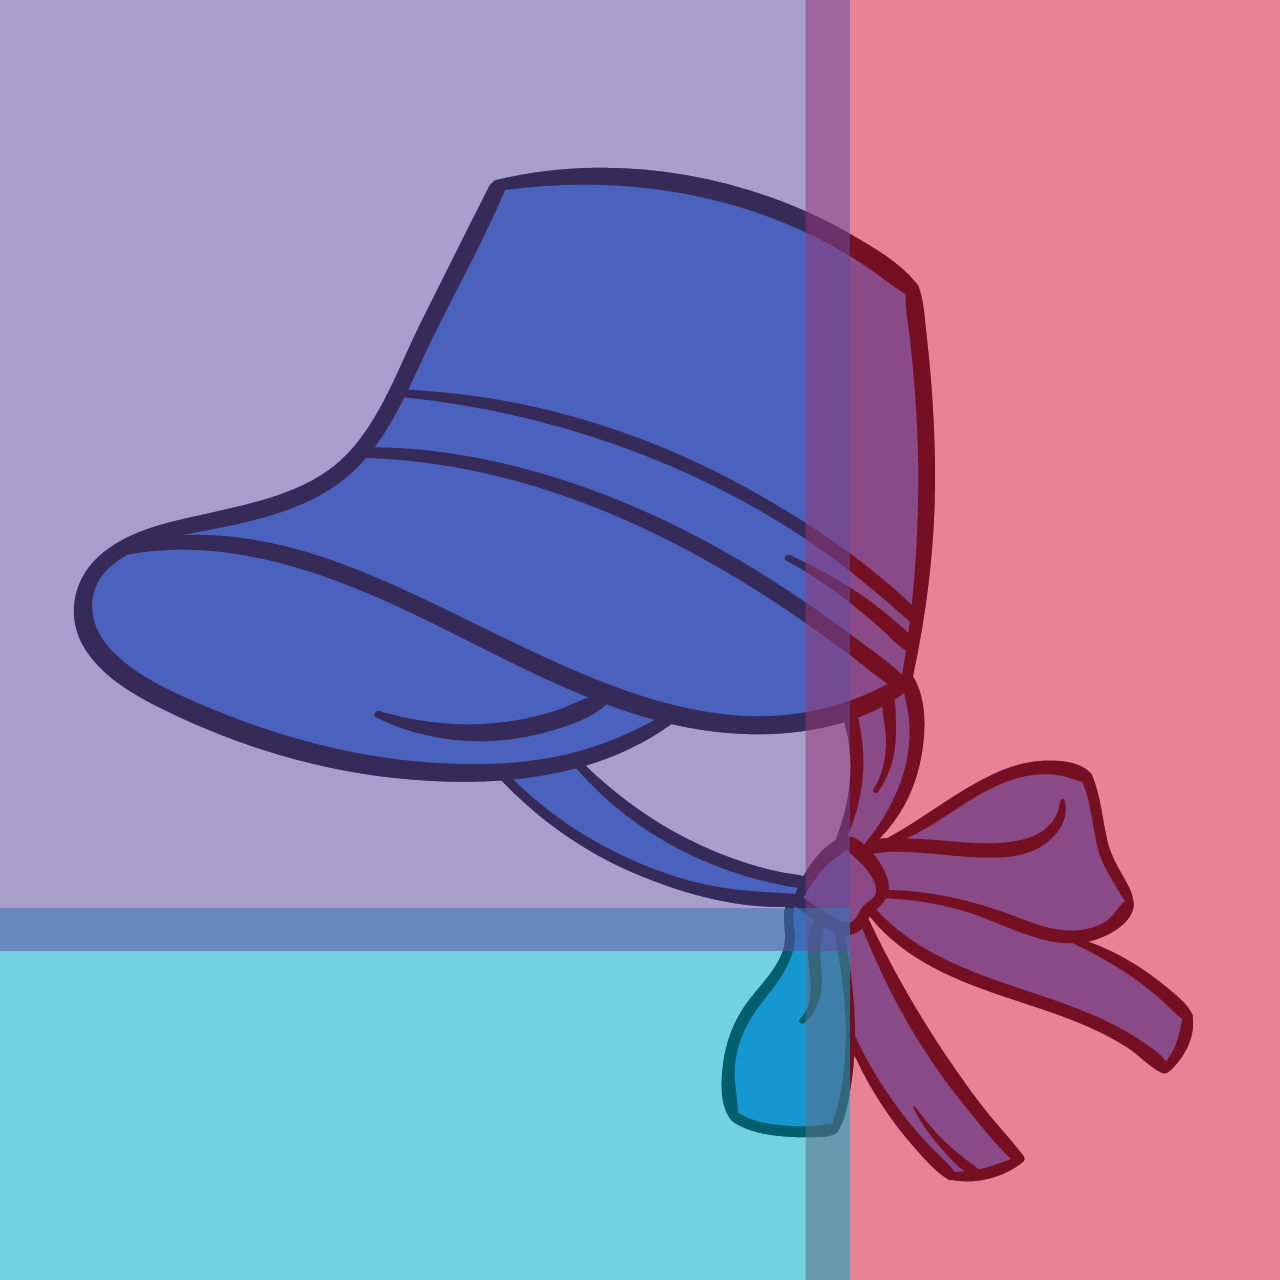 A sunbonnet overlaid with the library colors.